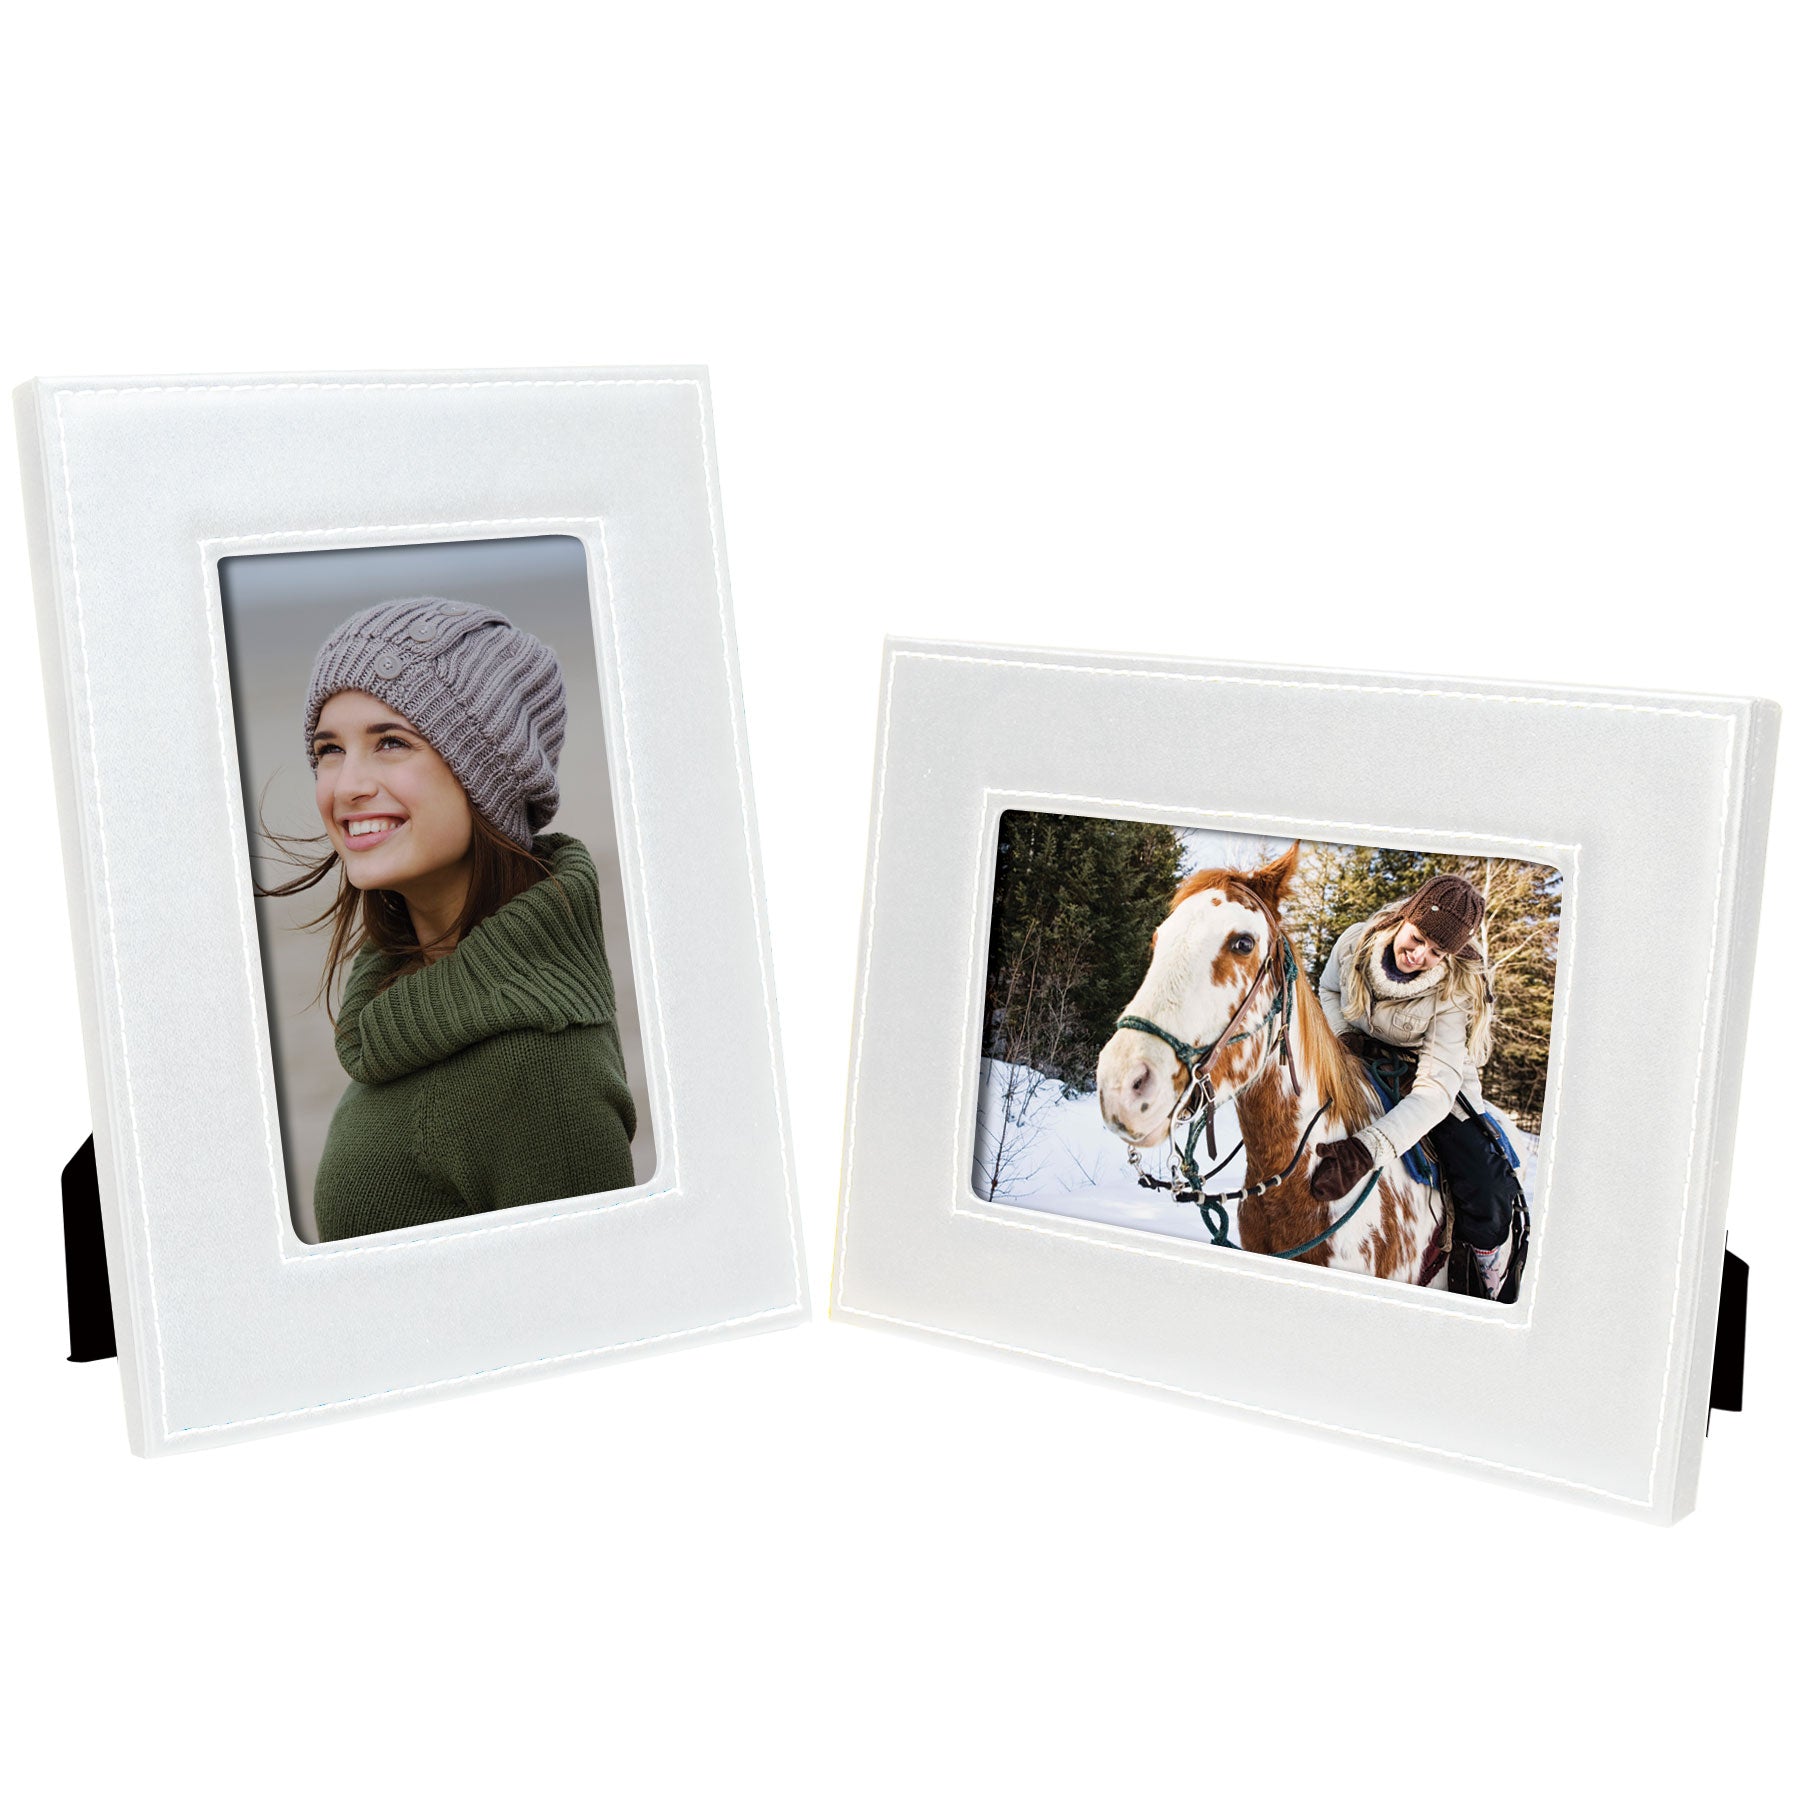 Leatherette Picture Frame w/White Stitching